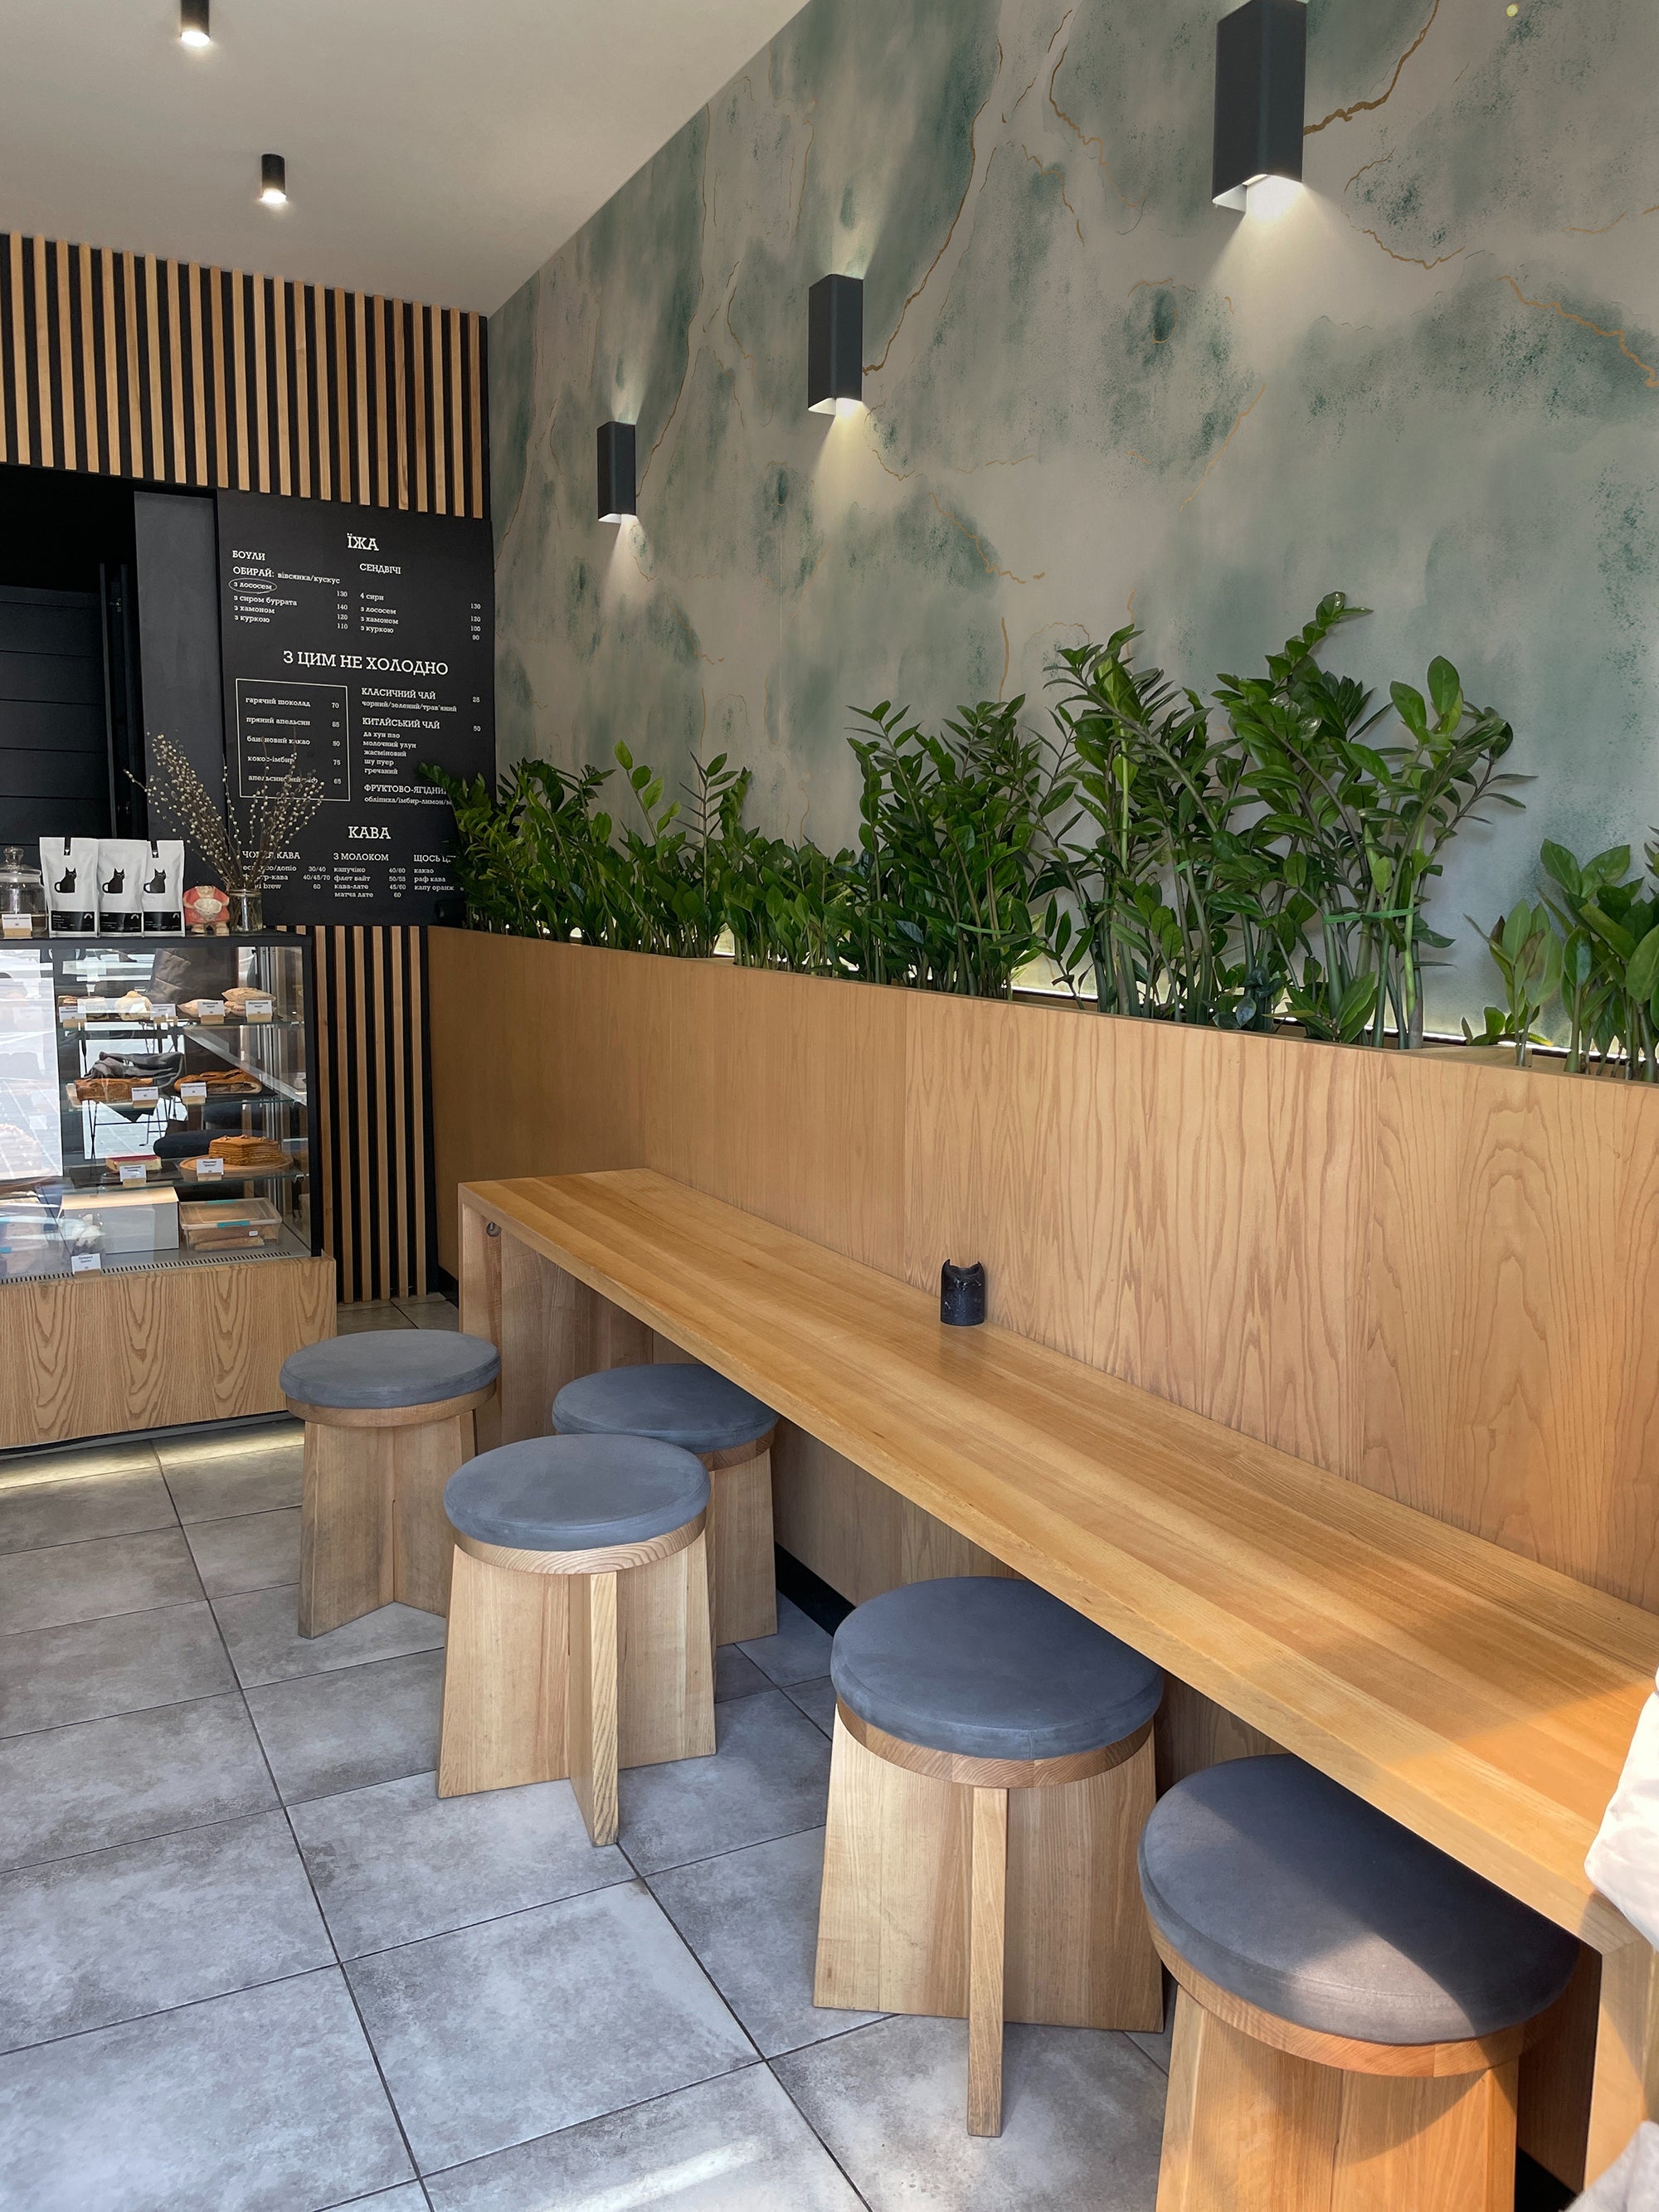 Interior of a modern café with a Shimmering Marble Wallpaper feature wall displaying a beautiful marble effect in shades of blue and green with gold veins. The setting includes a wooden bench with grey padded stools and green plants enhancing the natural ambiance